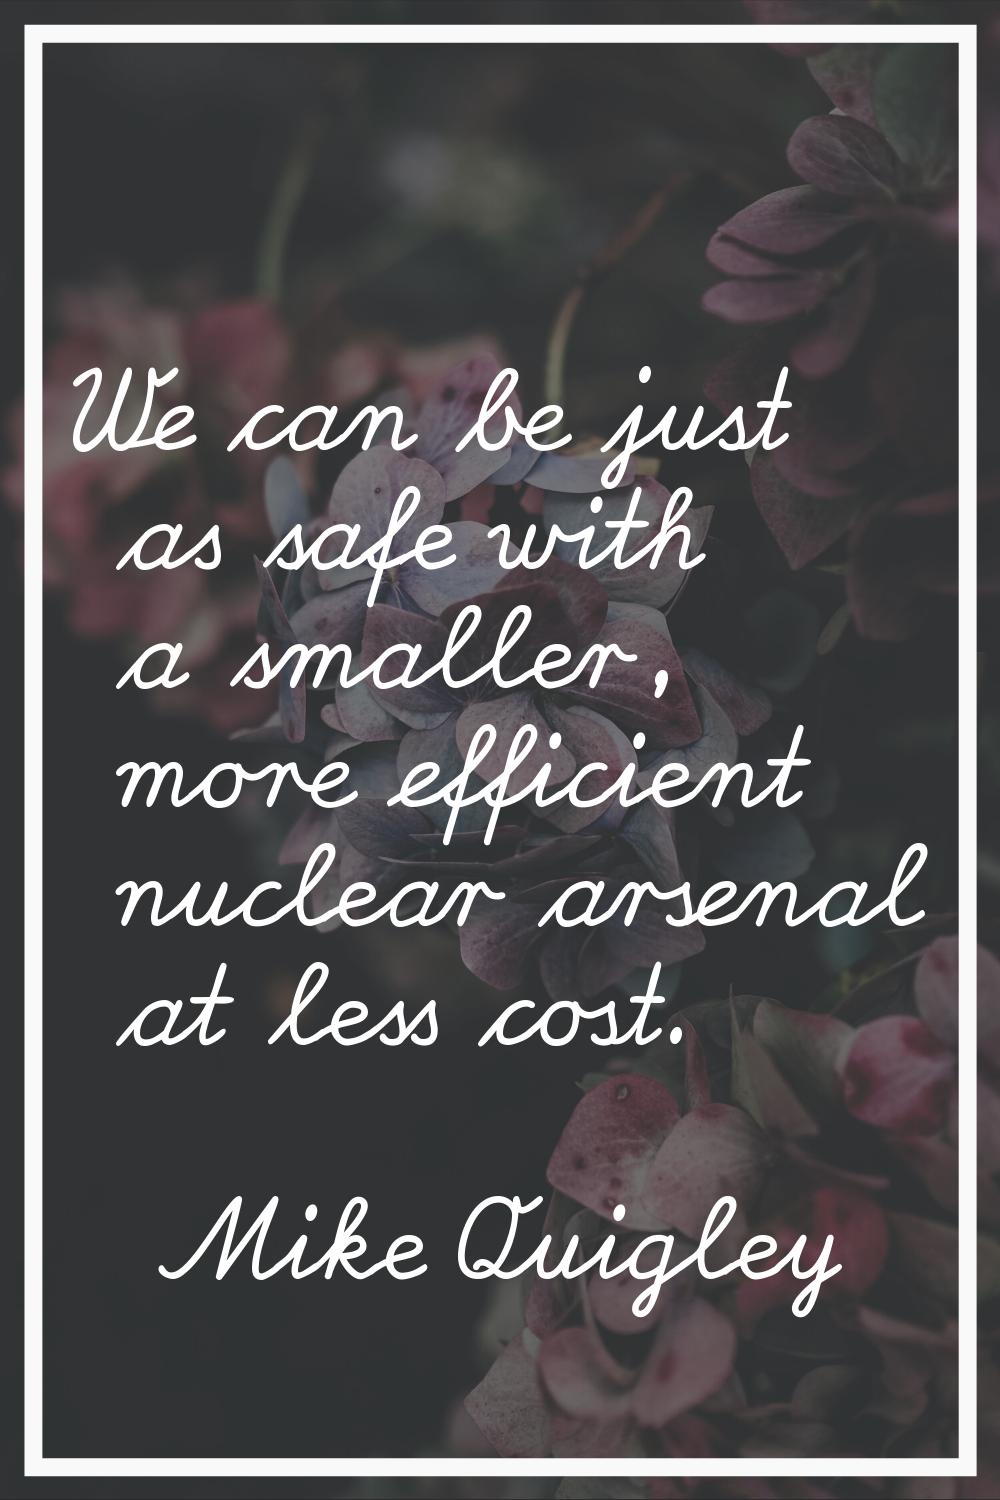 We can be just as safe with a smaller, more efficient nuclear arsenal at less cost.